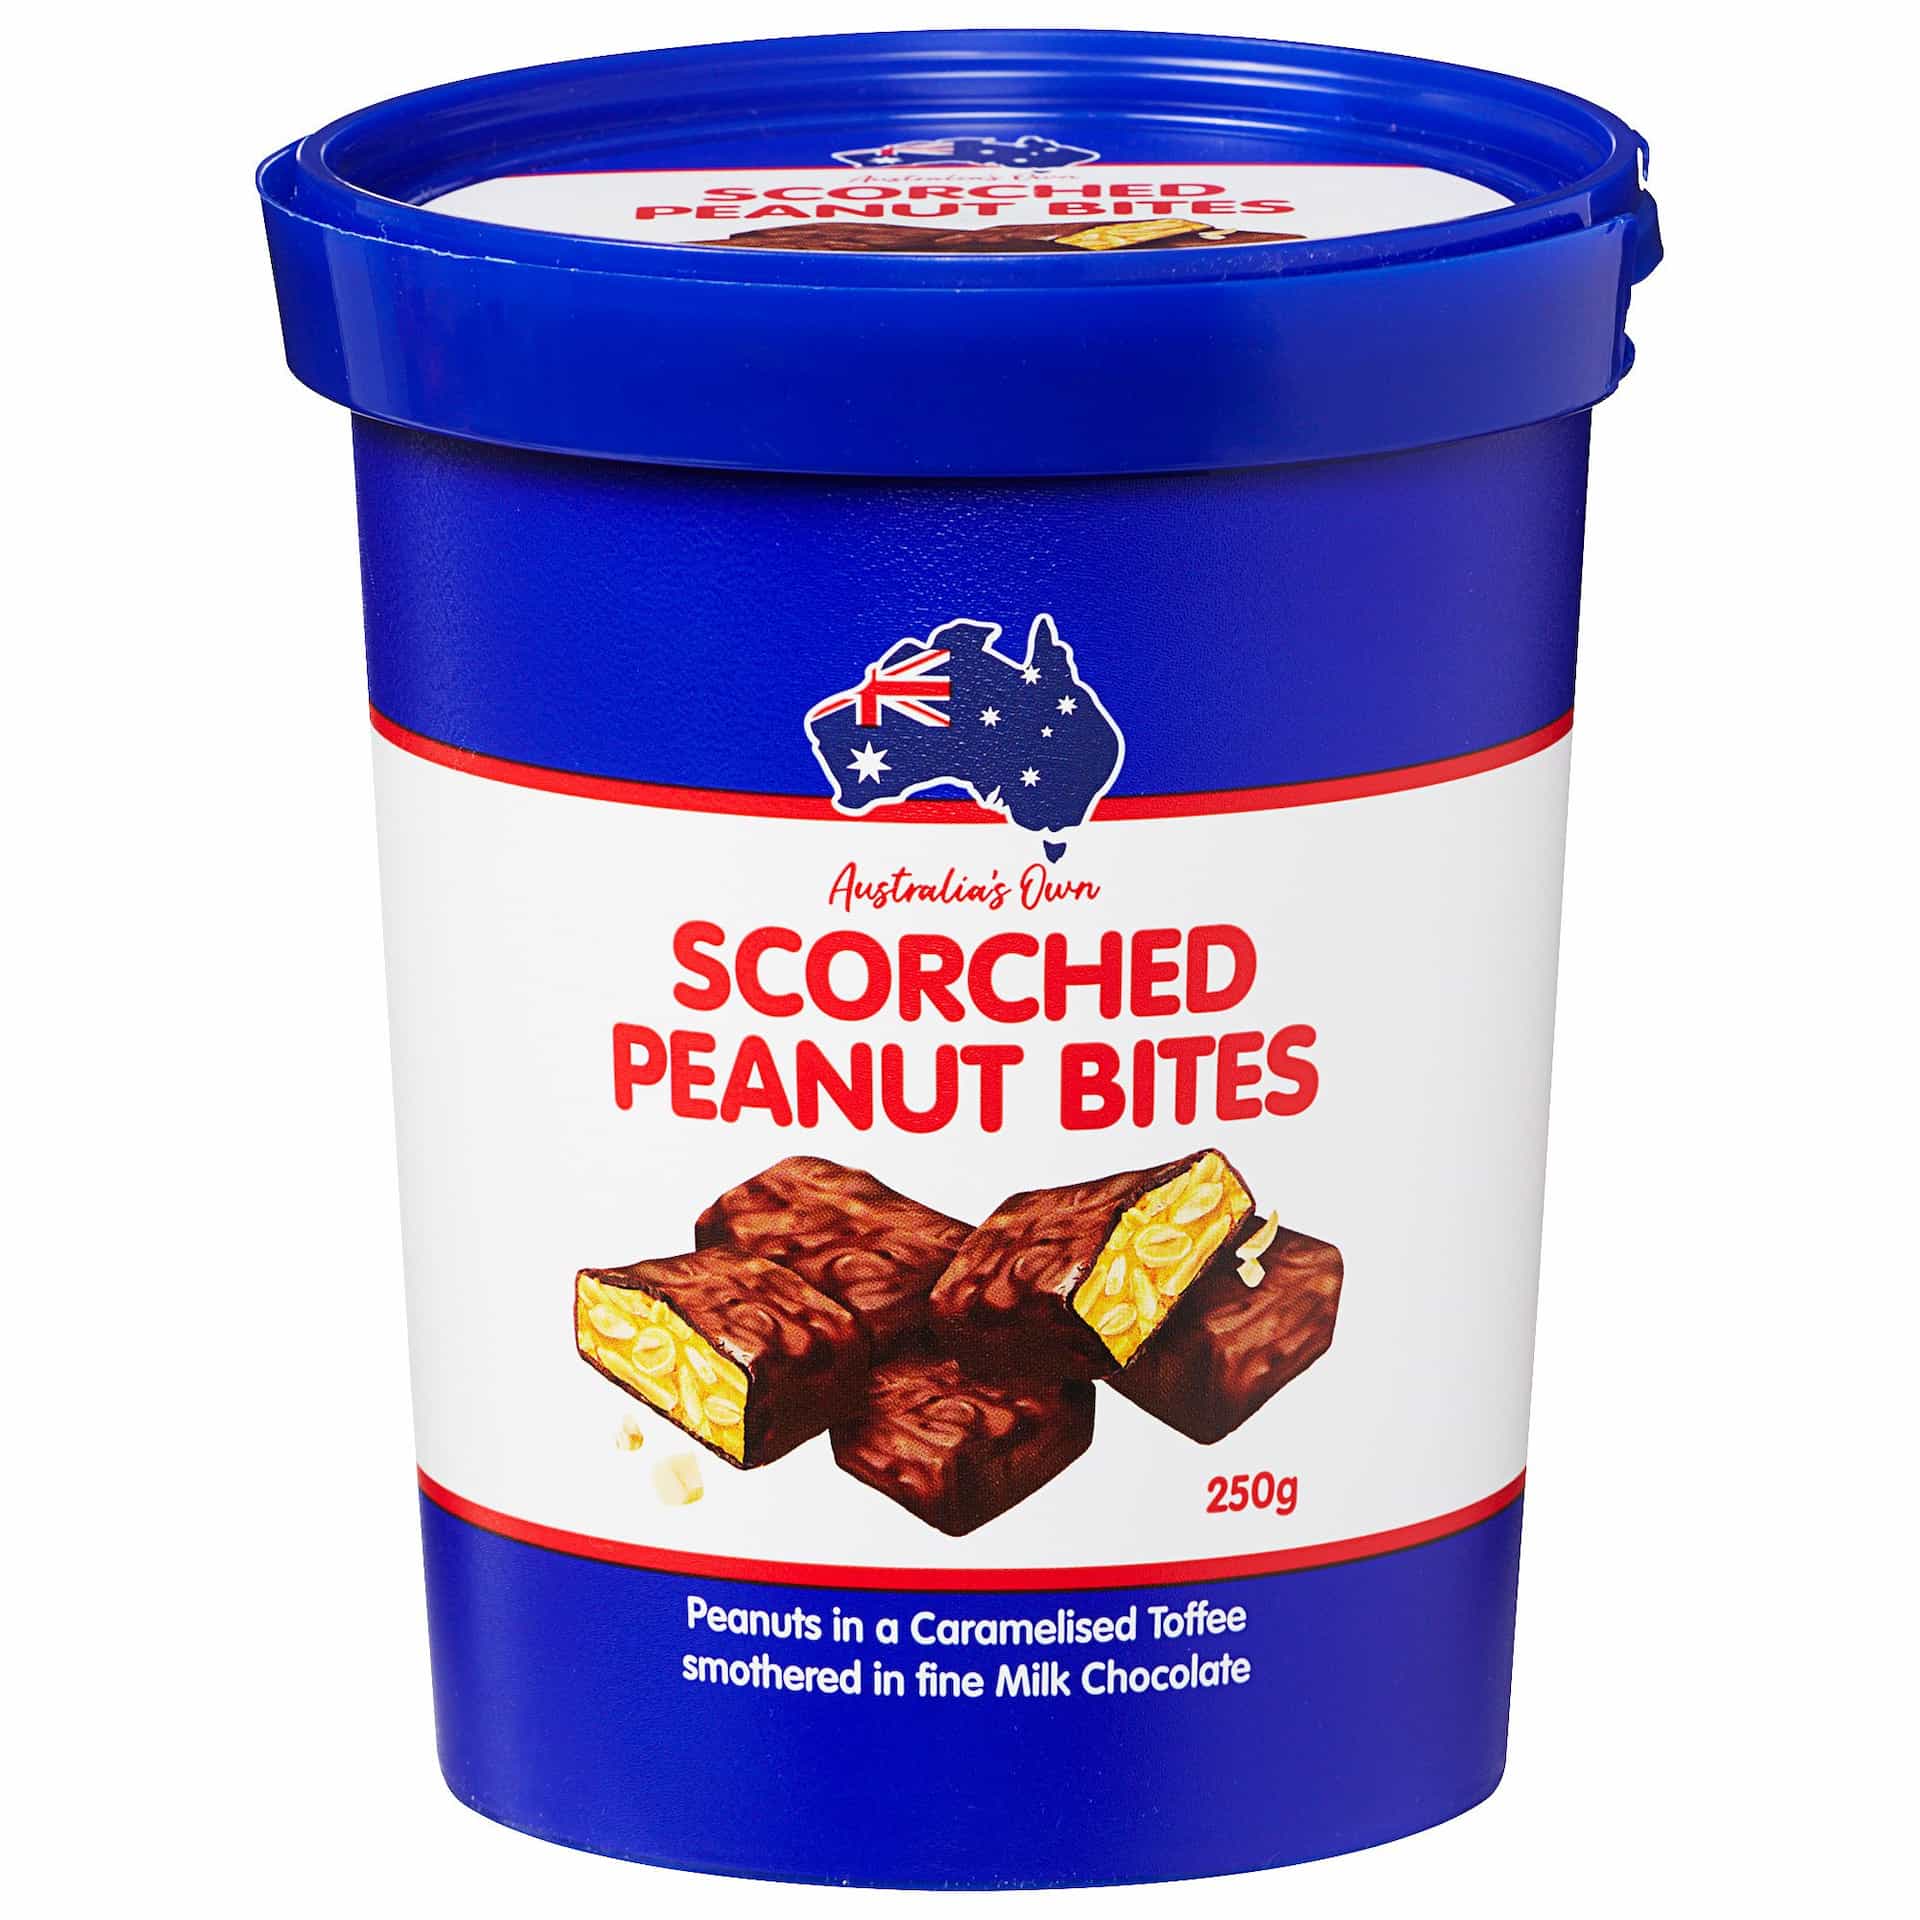 Buy Scorched Peanut Bites Tub 250g for $9(In-store only)